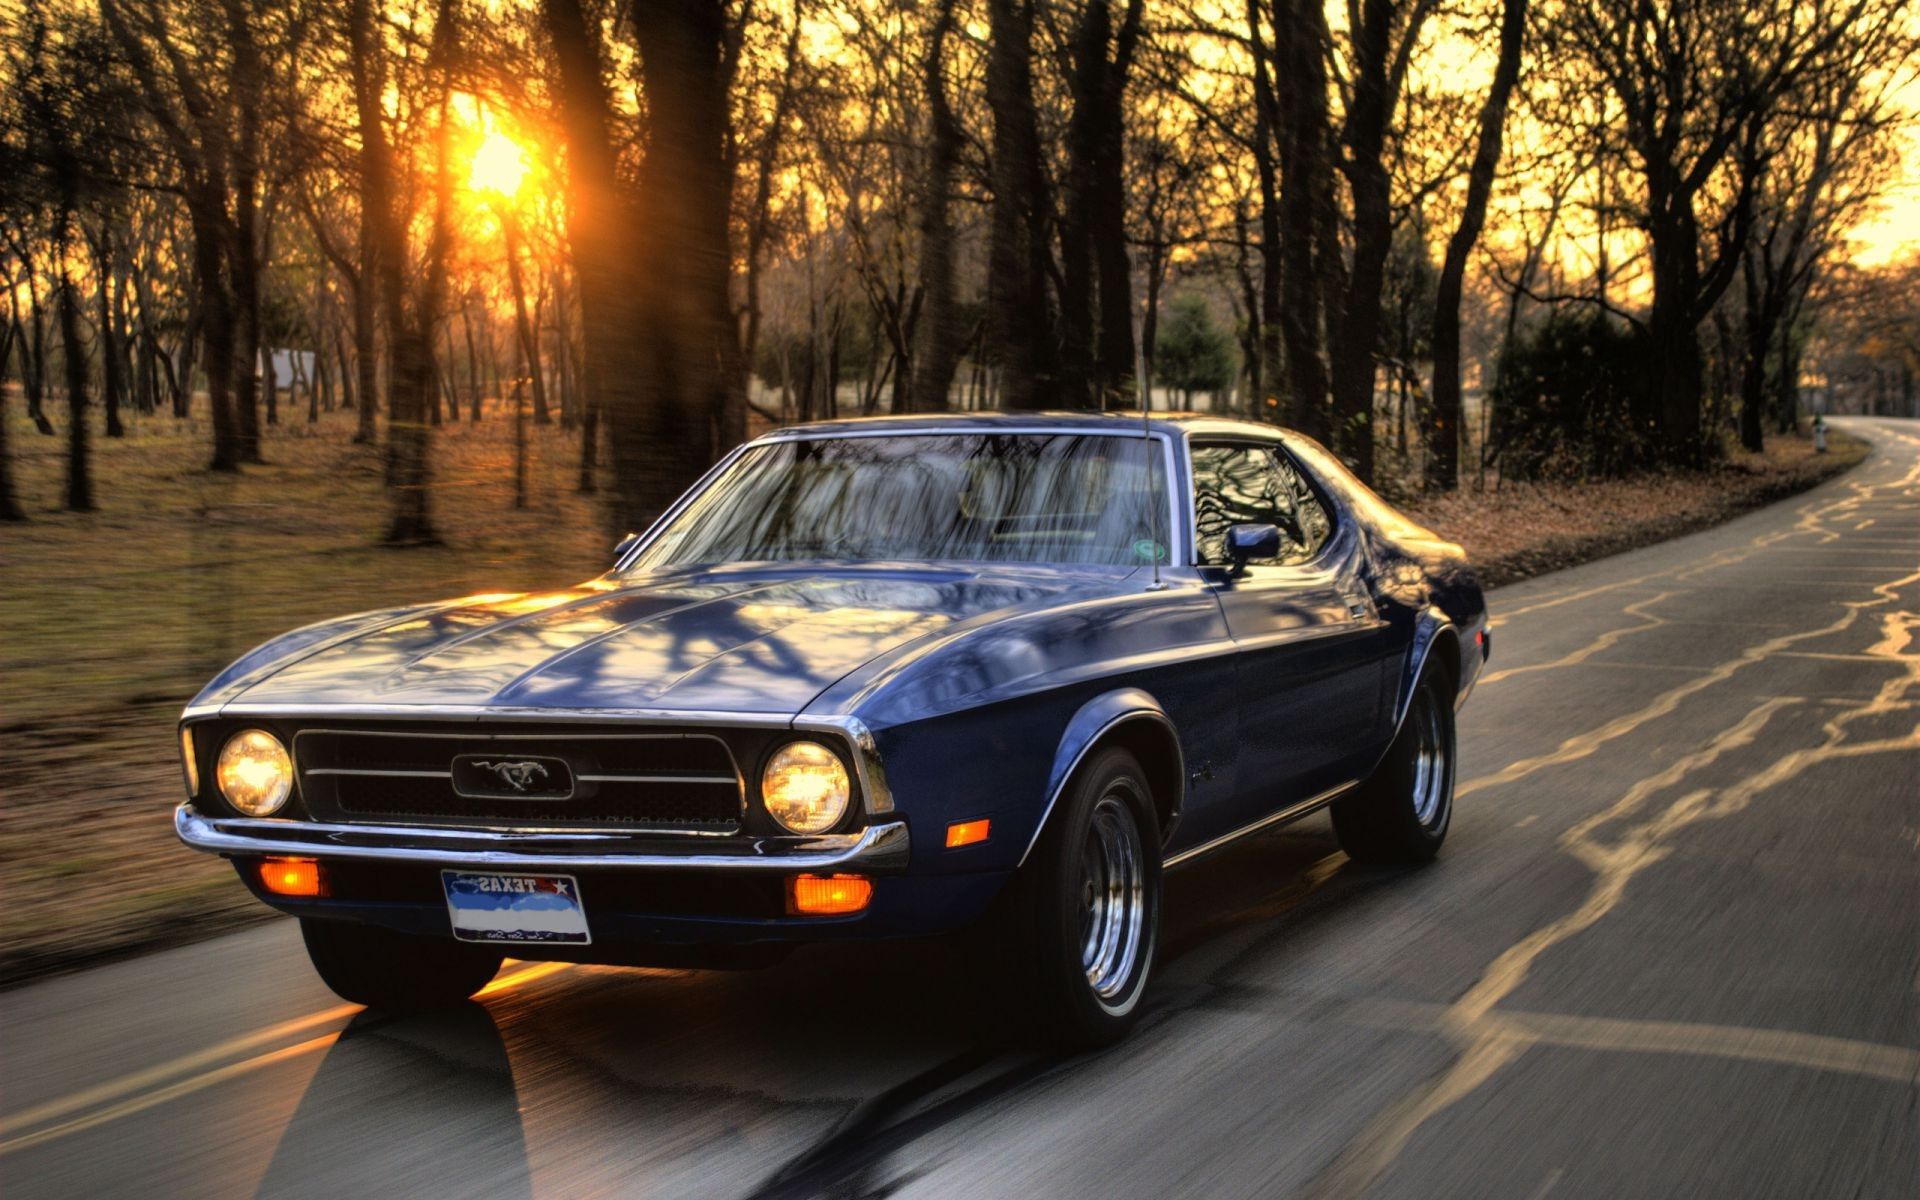 Ford Mustang rides at sunset on the road